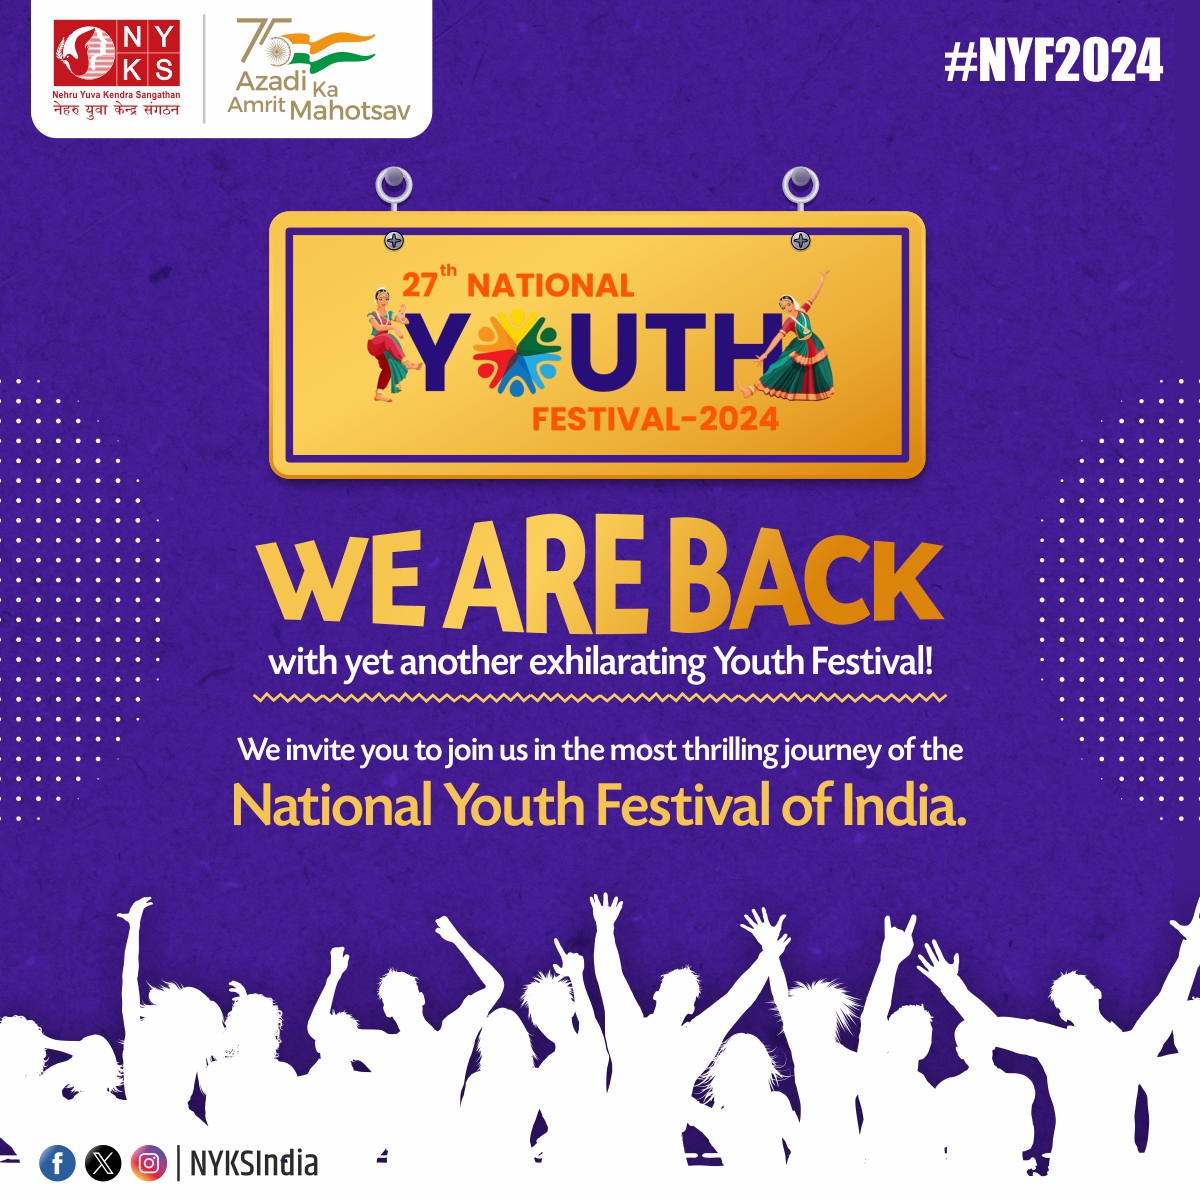 🎉 Exciting news! We're back with another thrilling Youth Festival! 🌟 Join us on the exhilarating journey of the National Youth Festival of India. 🇮🇳 #NationalYouthFestival #NYF2024 #ThrillingJourney #Youth #NYKS